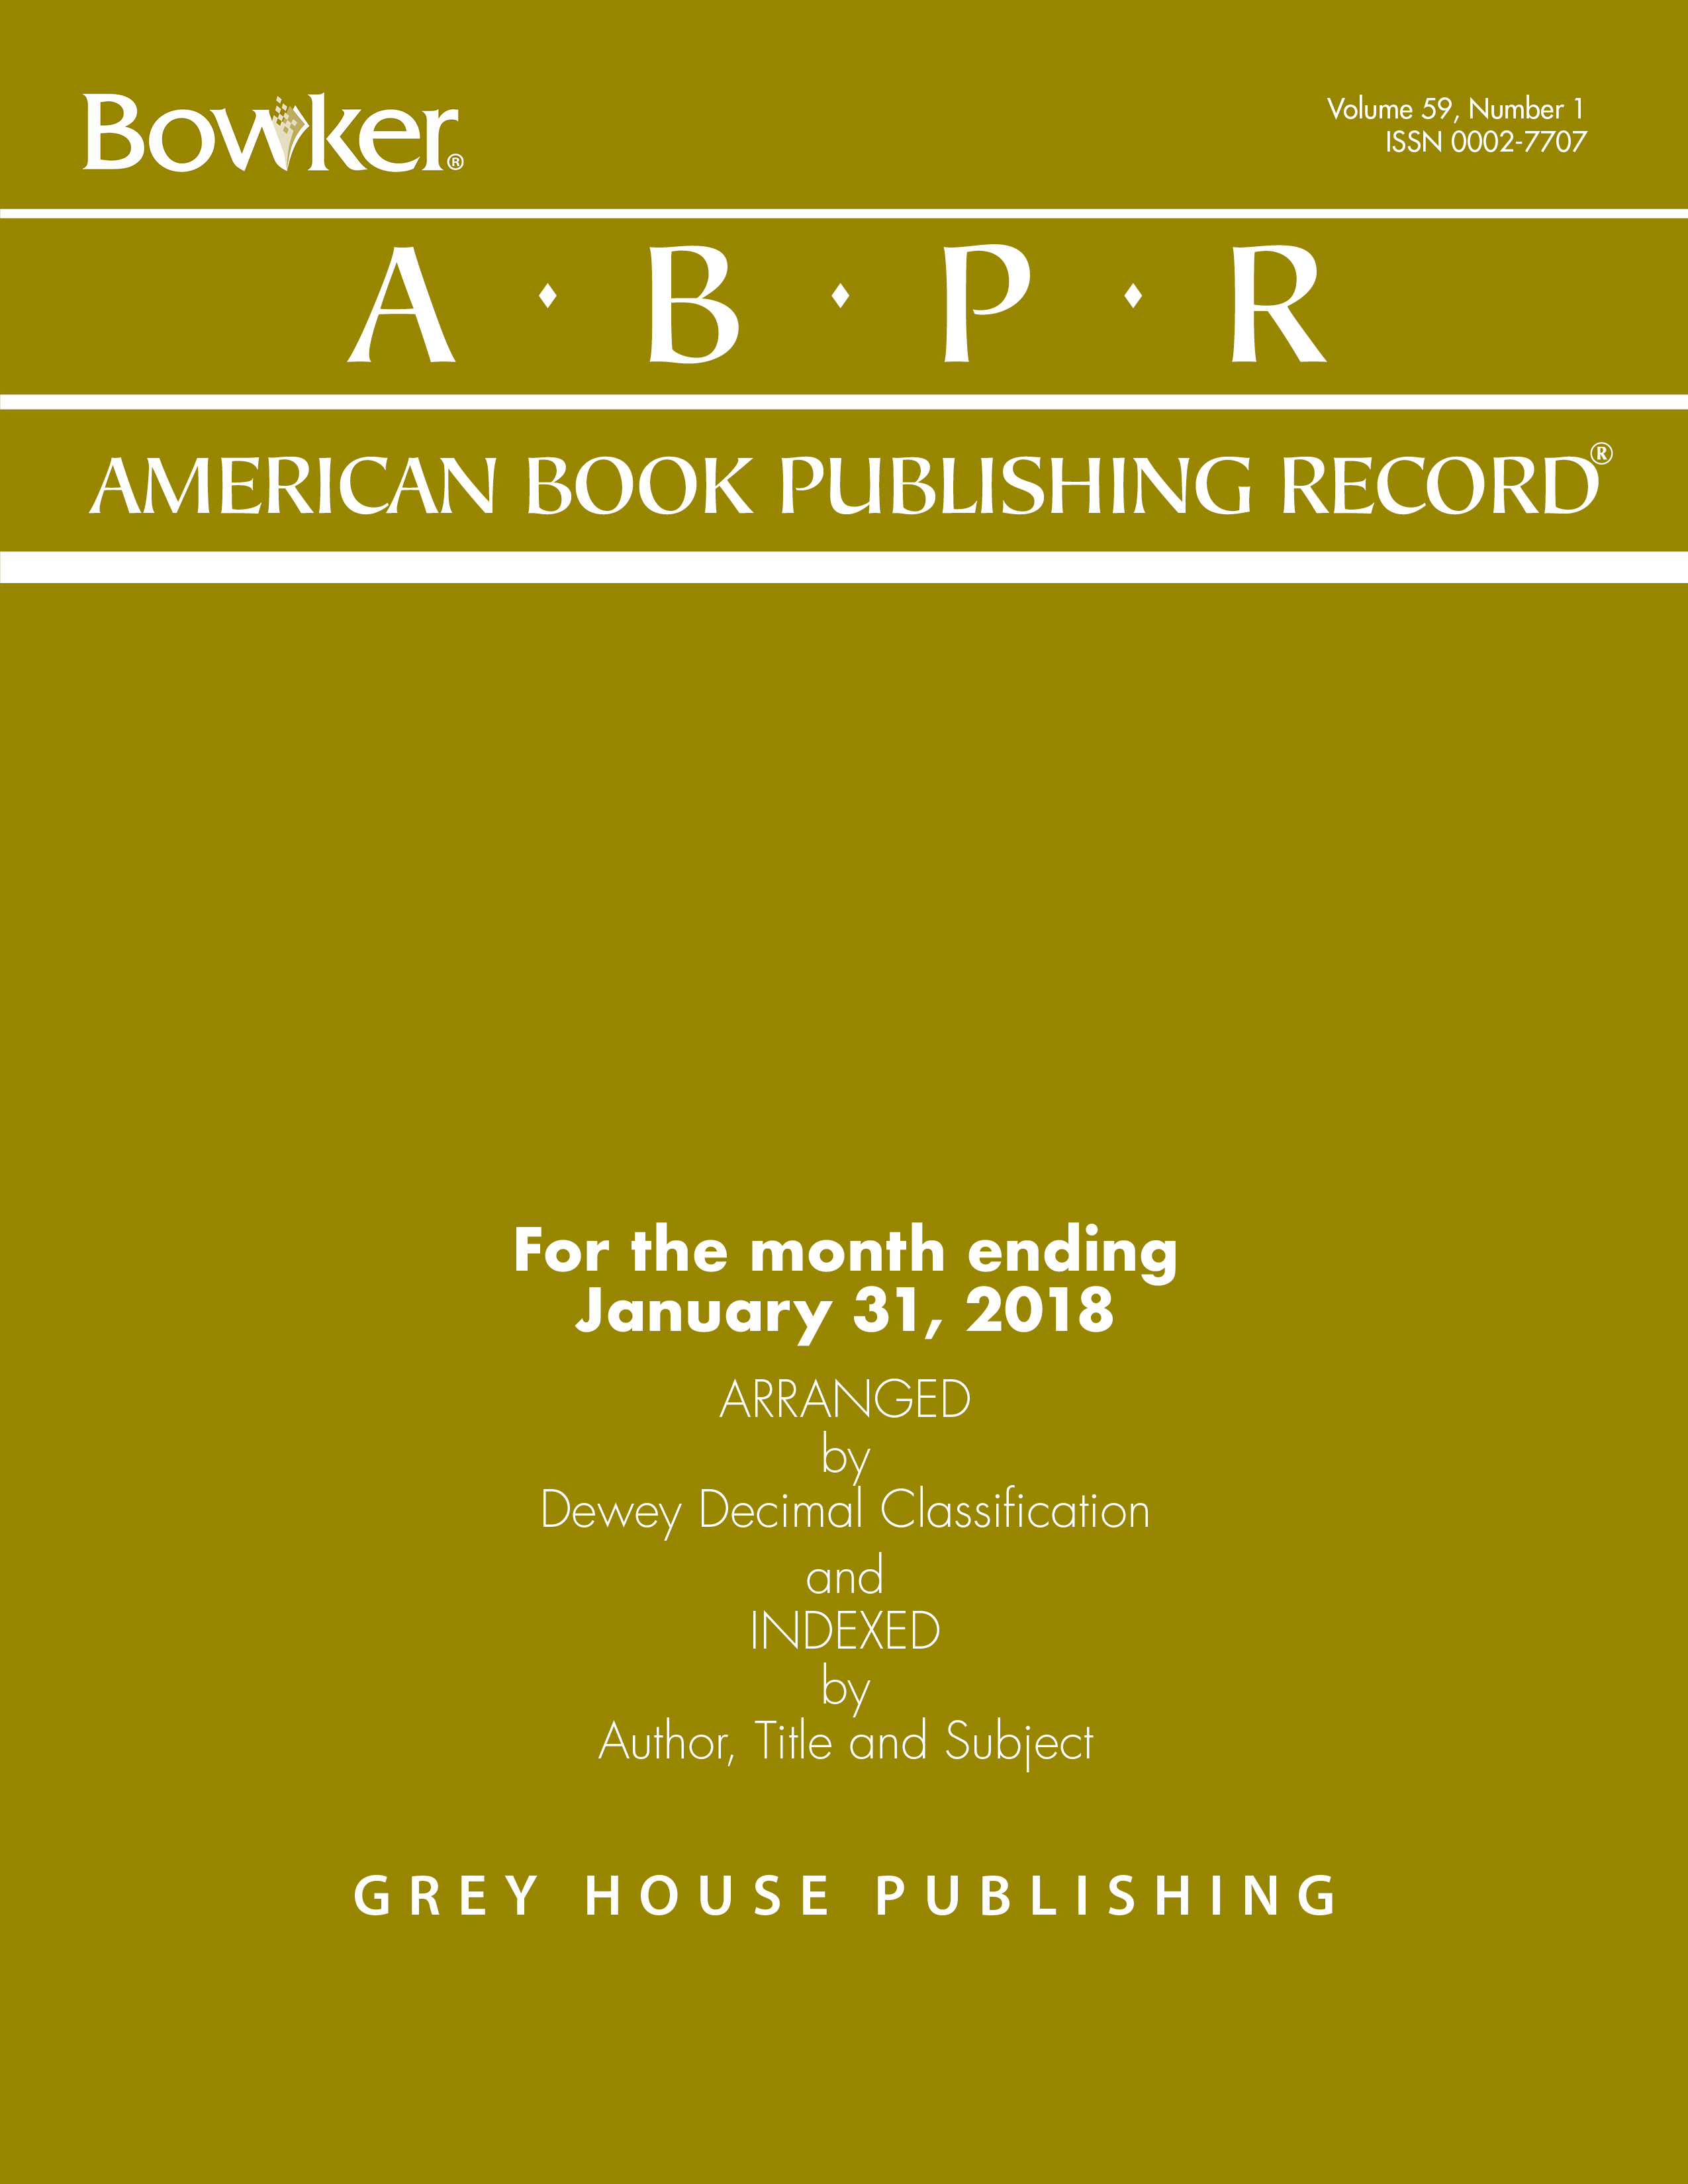 RR Bowker's American Book Publishing Record Monthly